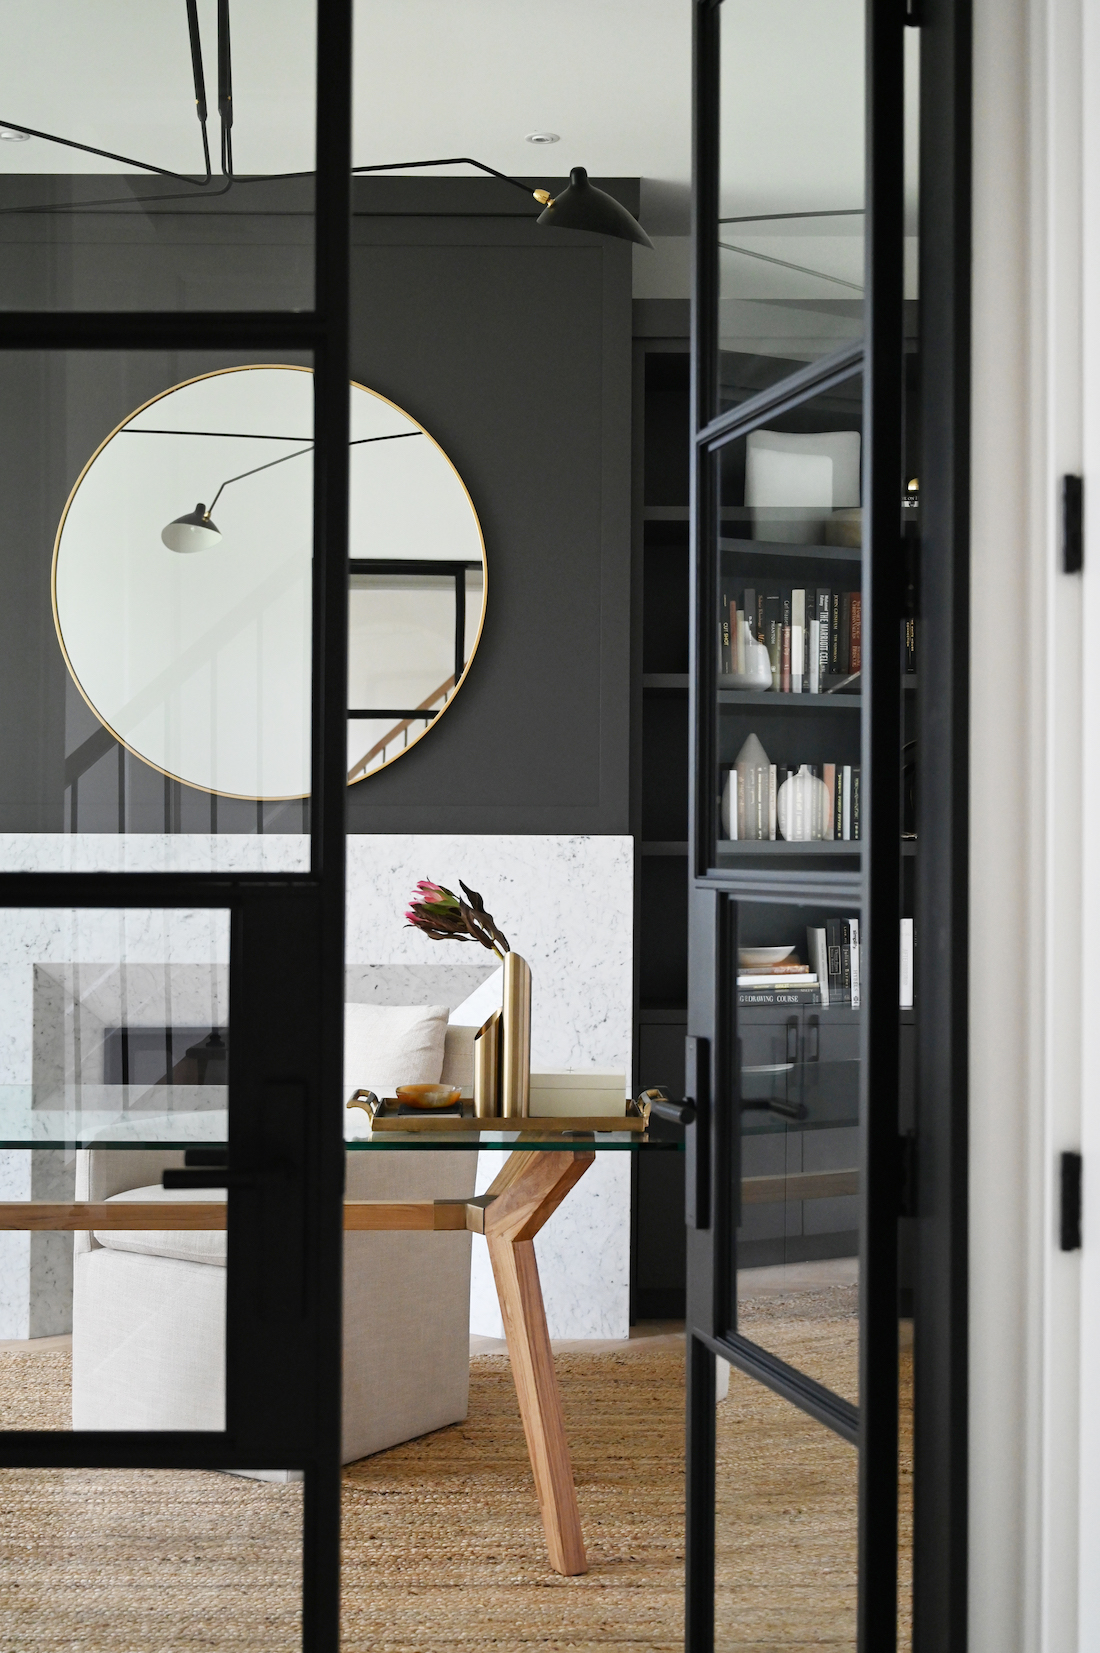 Black framed glass door in study with round mirror